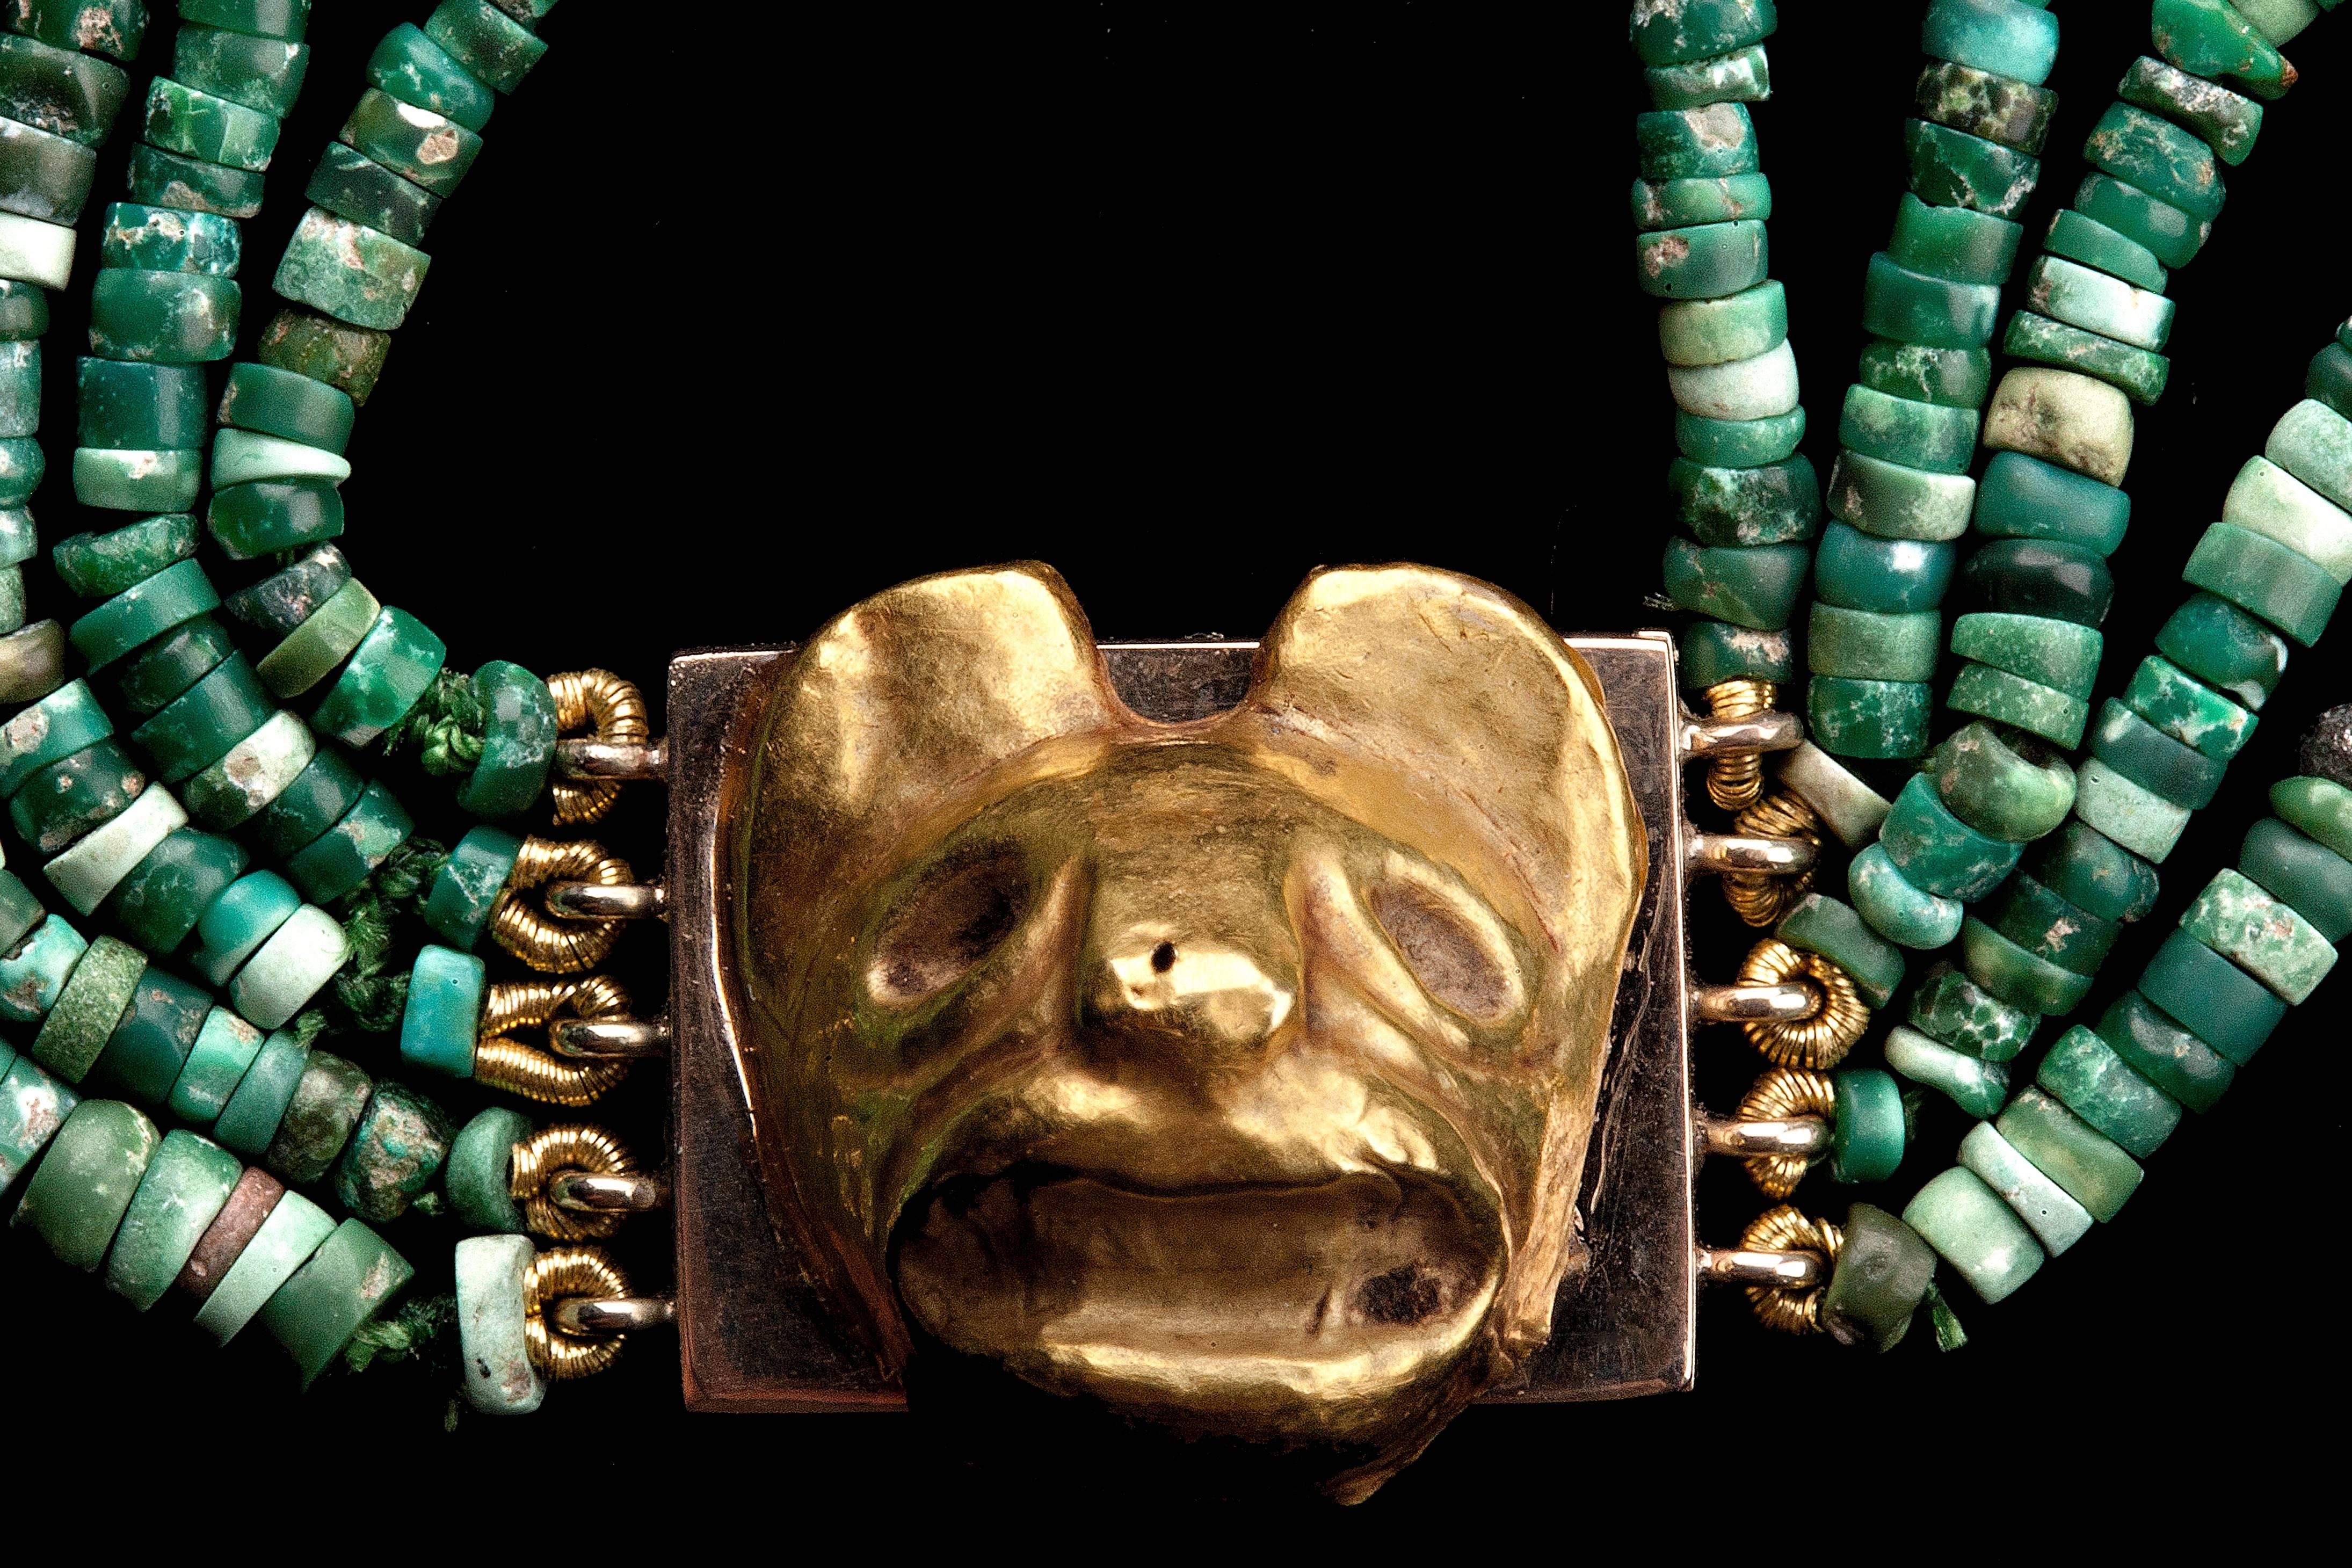 5 String Necklace of Peruvian Precolumbian Imperial Turquoise/Malachite Miniature Beads (2000 years old) with Chavin Gold Feline Masquette, Ex. Gerald Berjonneau. Modern new string and clasp.